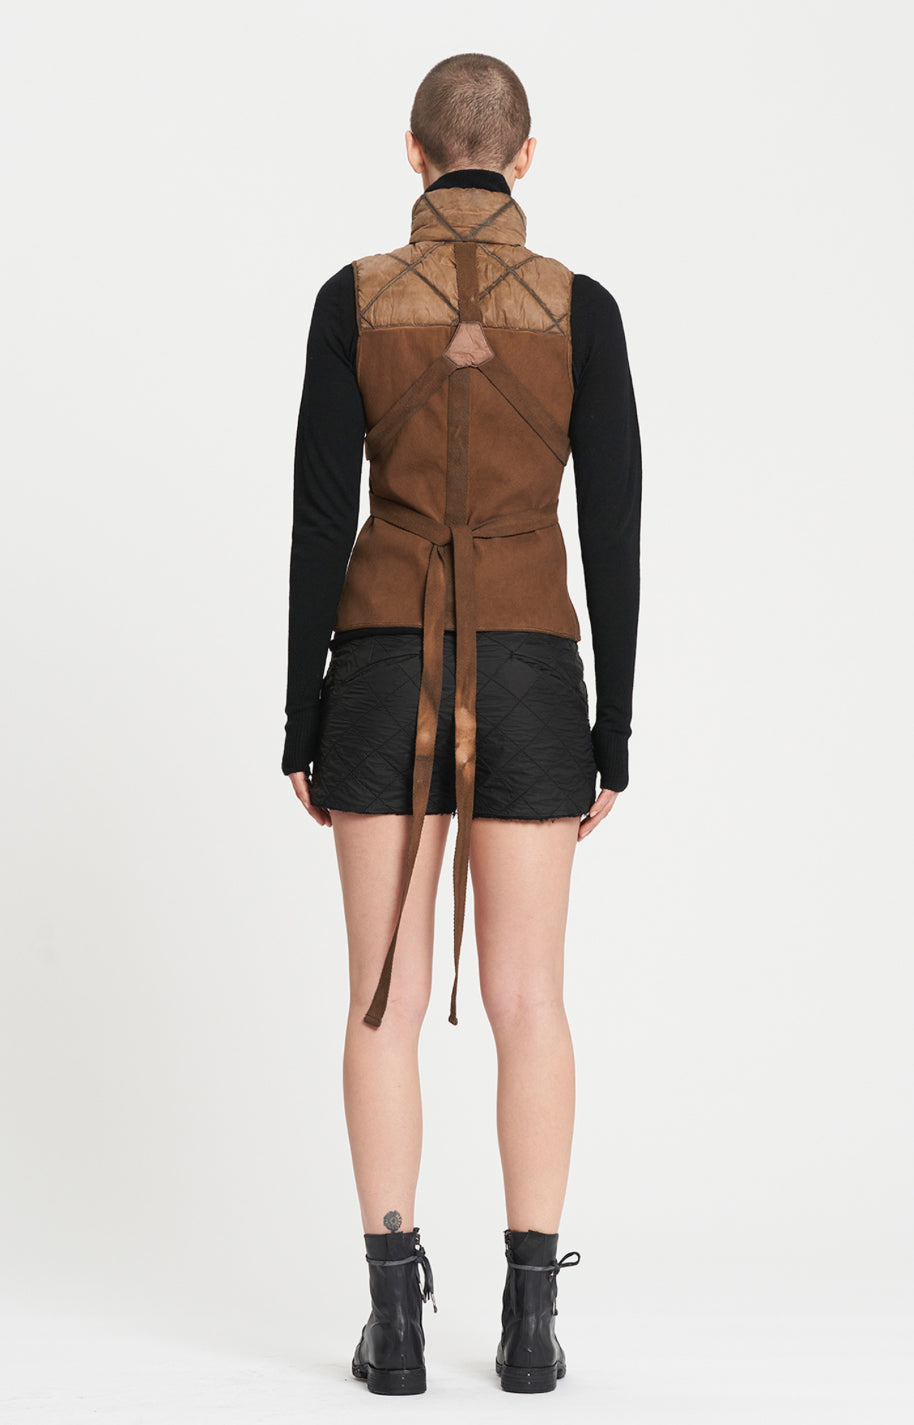 Ribbed Gilet by Masnada